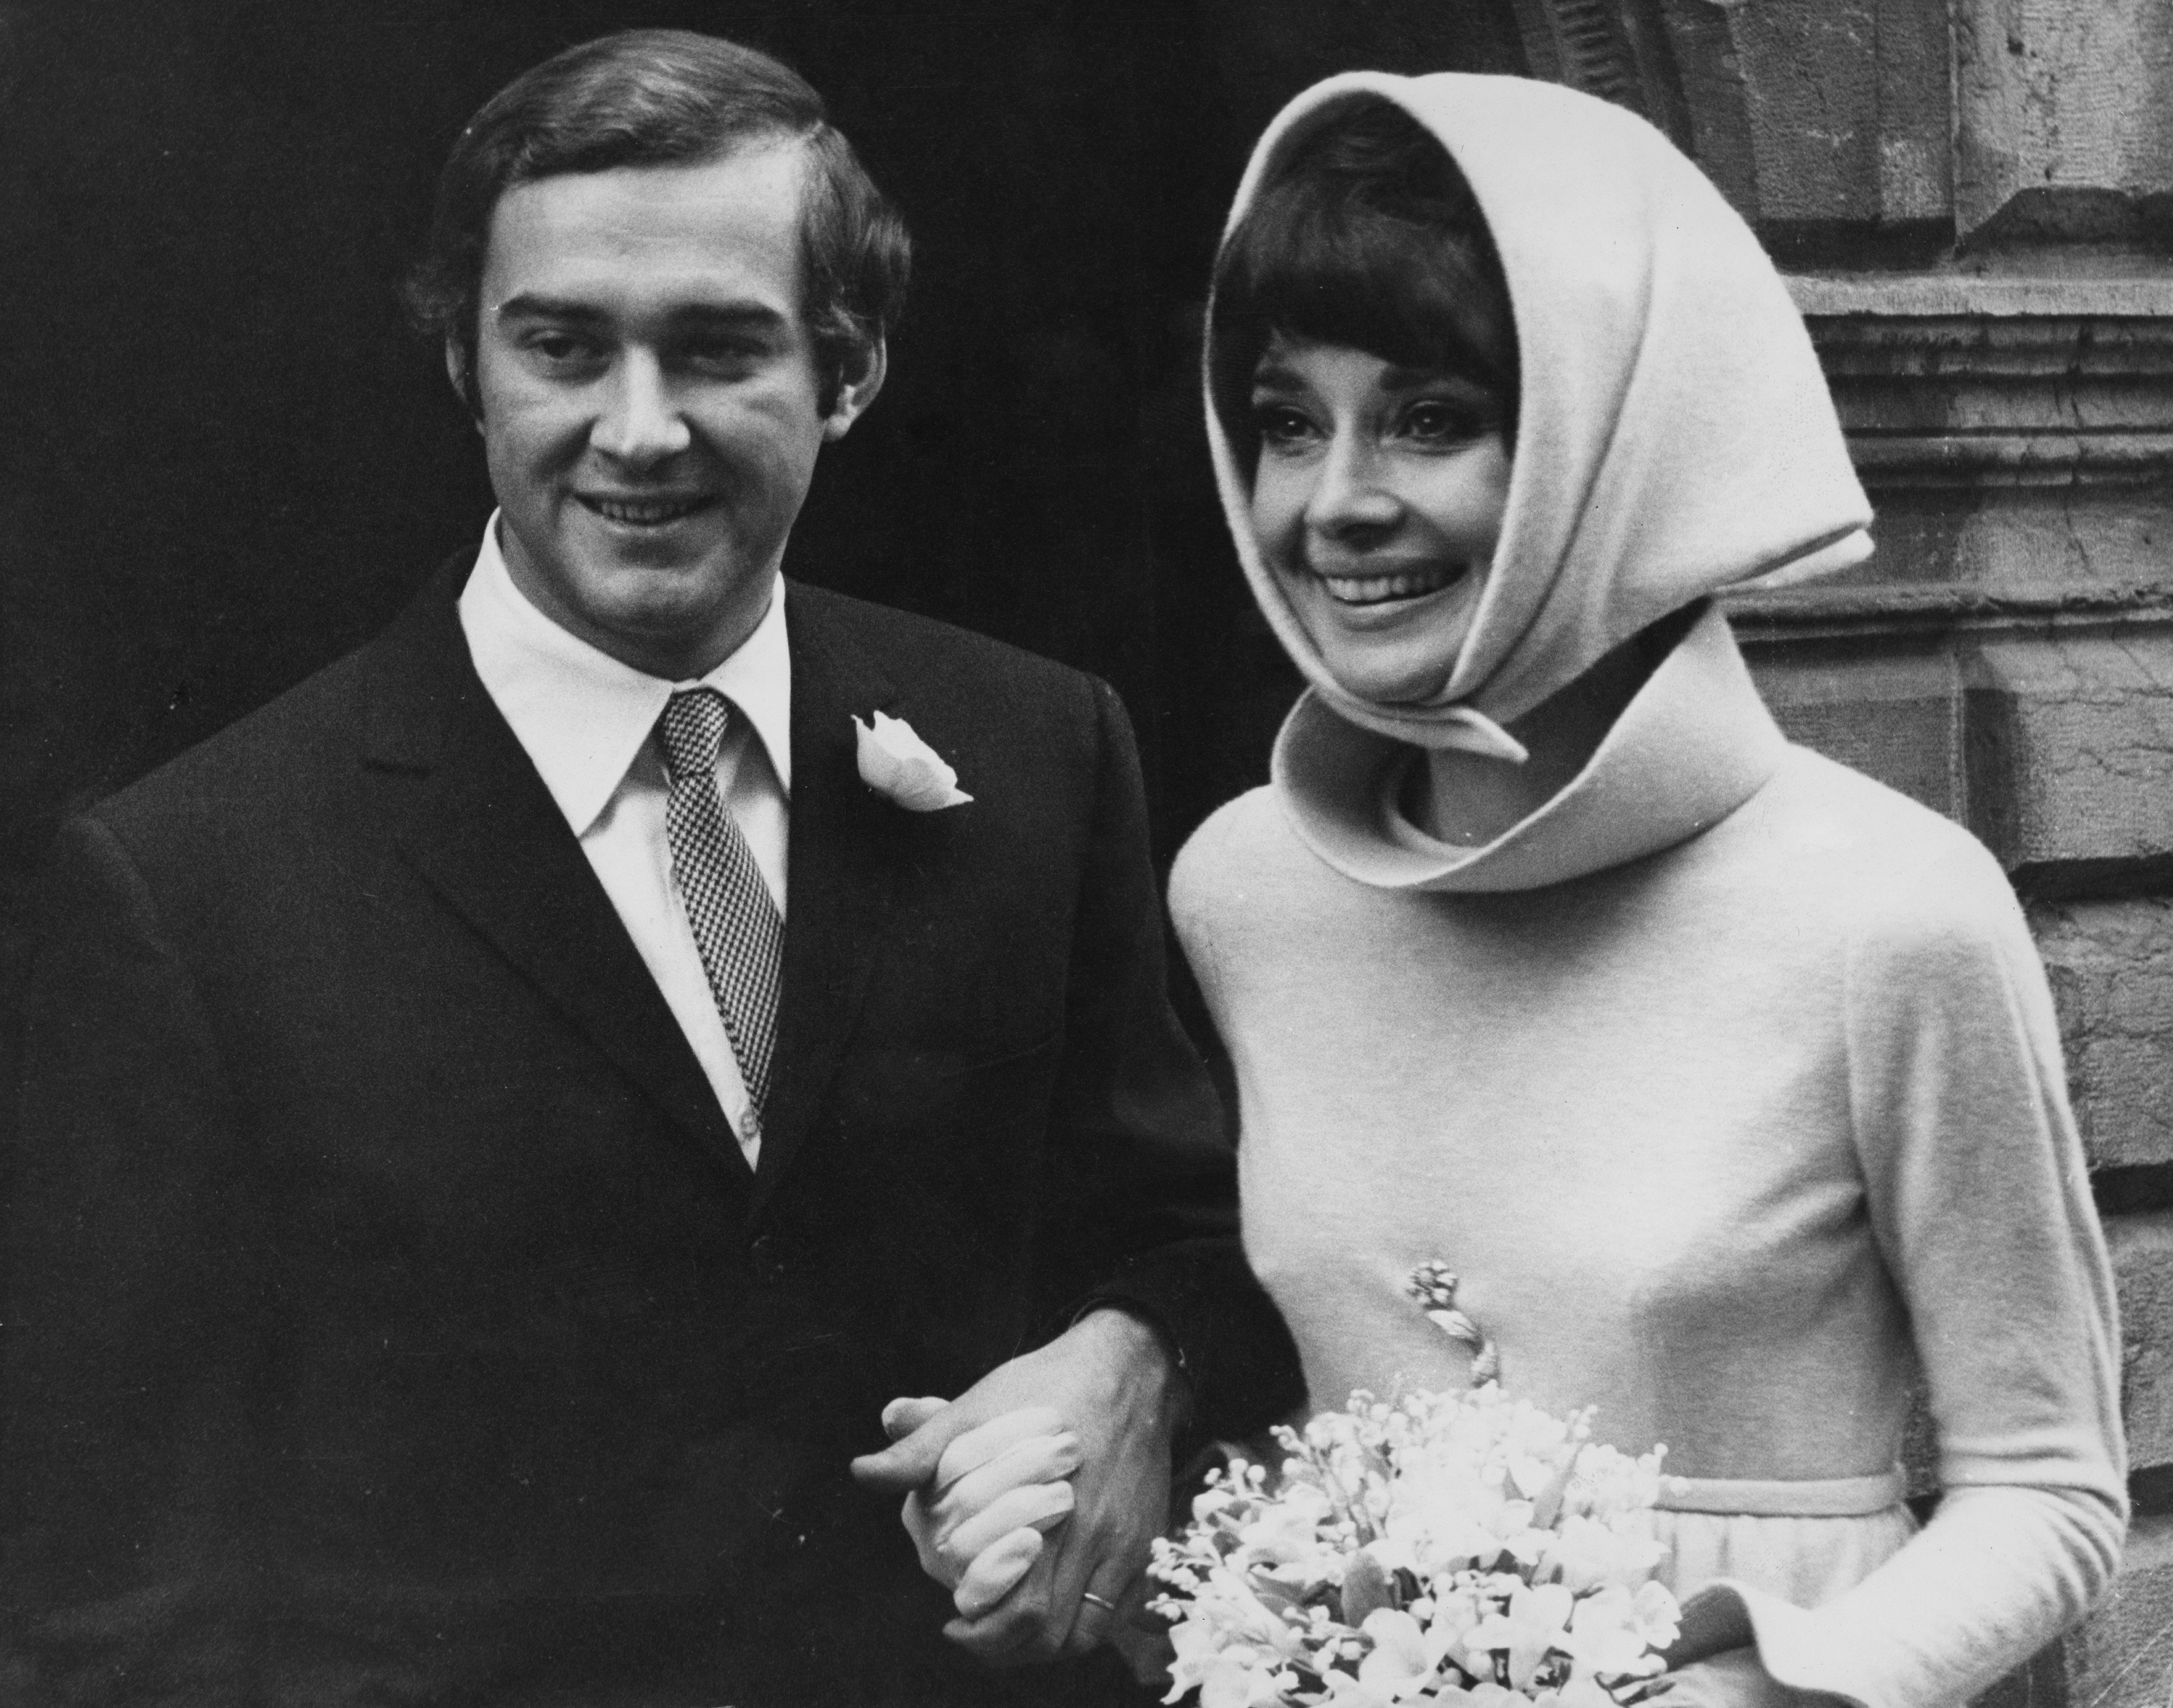 Belgian-born actress Audrey Hepburn (1929 - 1993) with her second husband, Italian psychiatrist Andrea Dotti (1938 - 2007), after their wedding in Morges, Switzerland, 18th January 1969. | Source: Getty Images